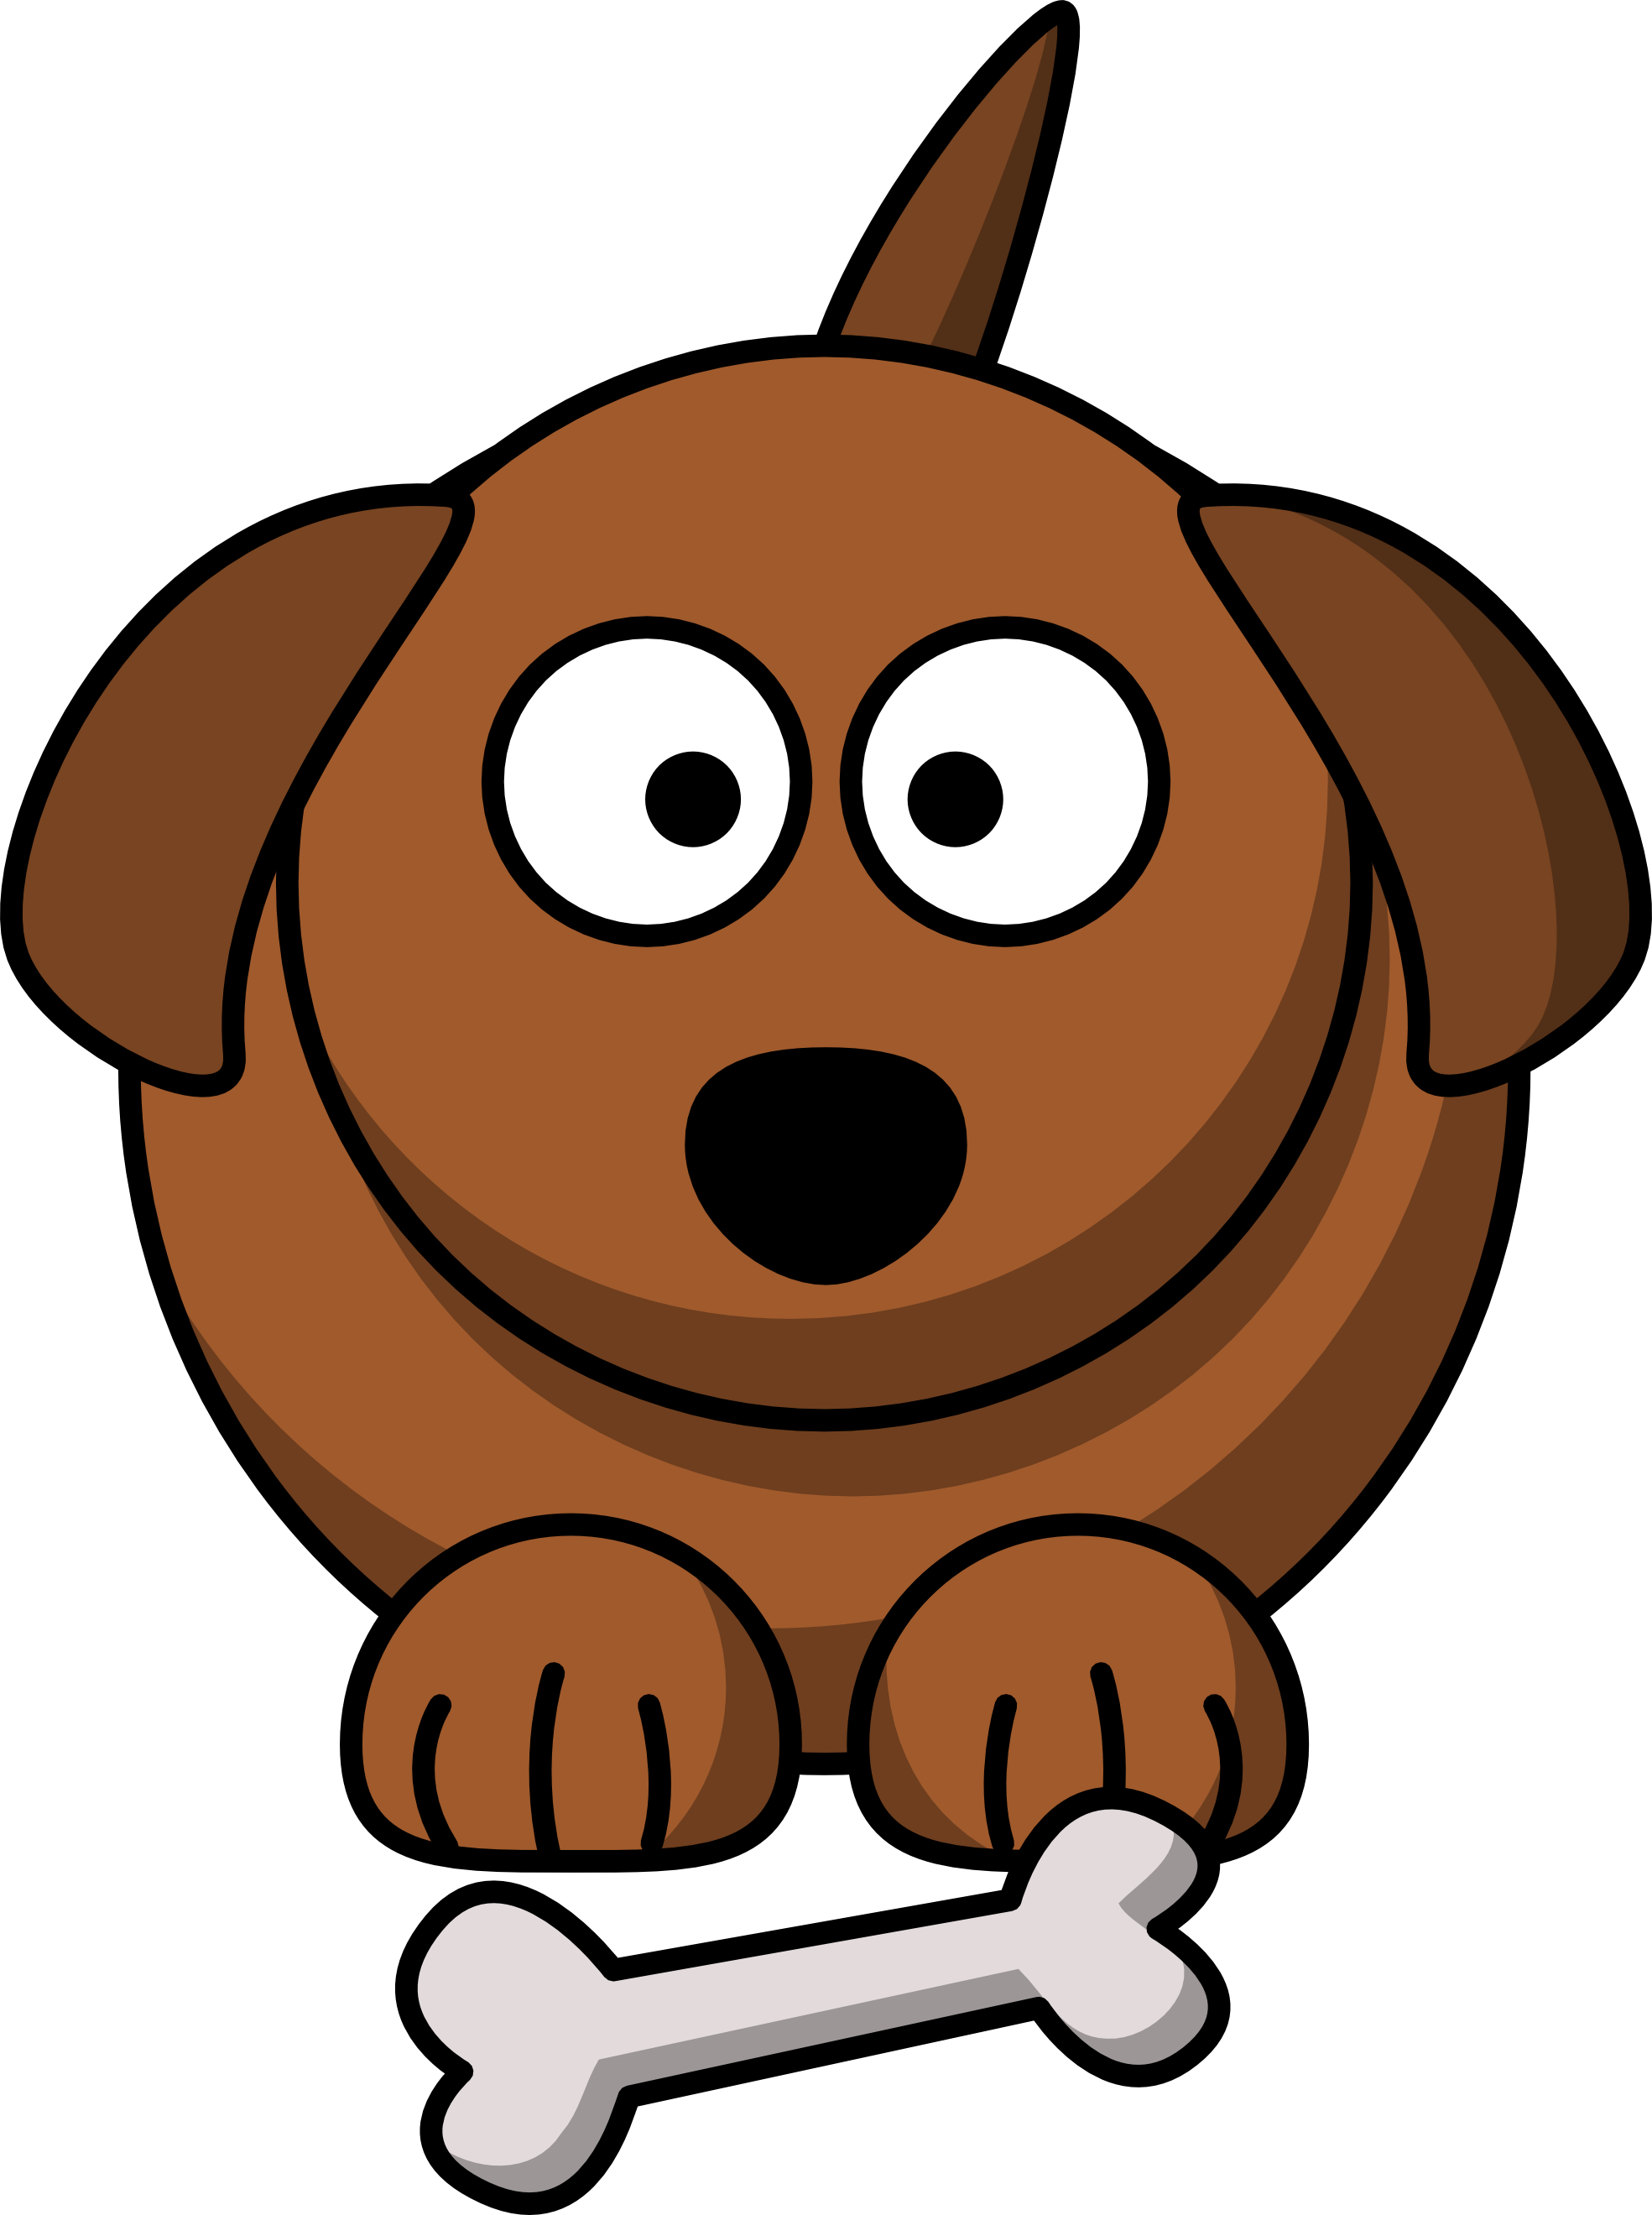 Free Dog Cartoon Drawings, Download Free Clip Art, Free Clip Art on Clipart Library